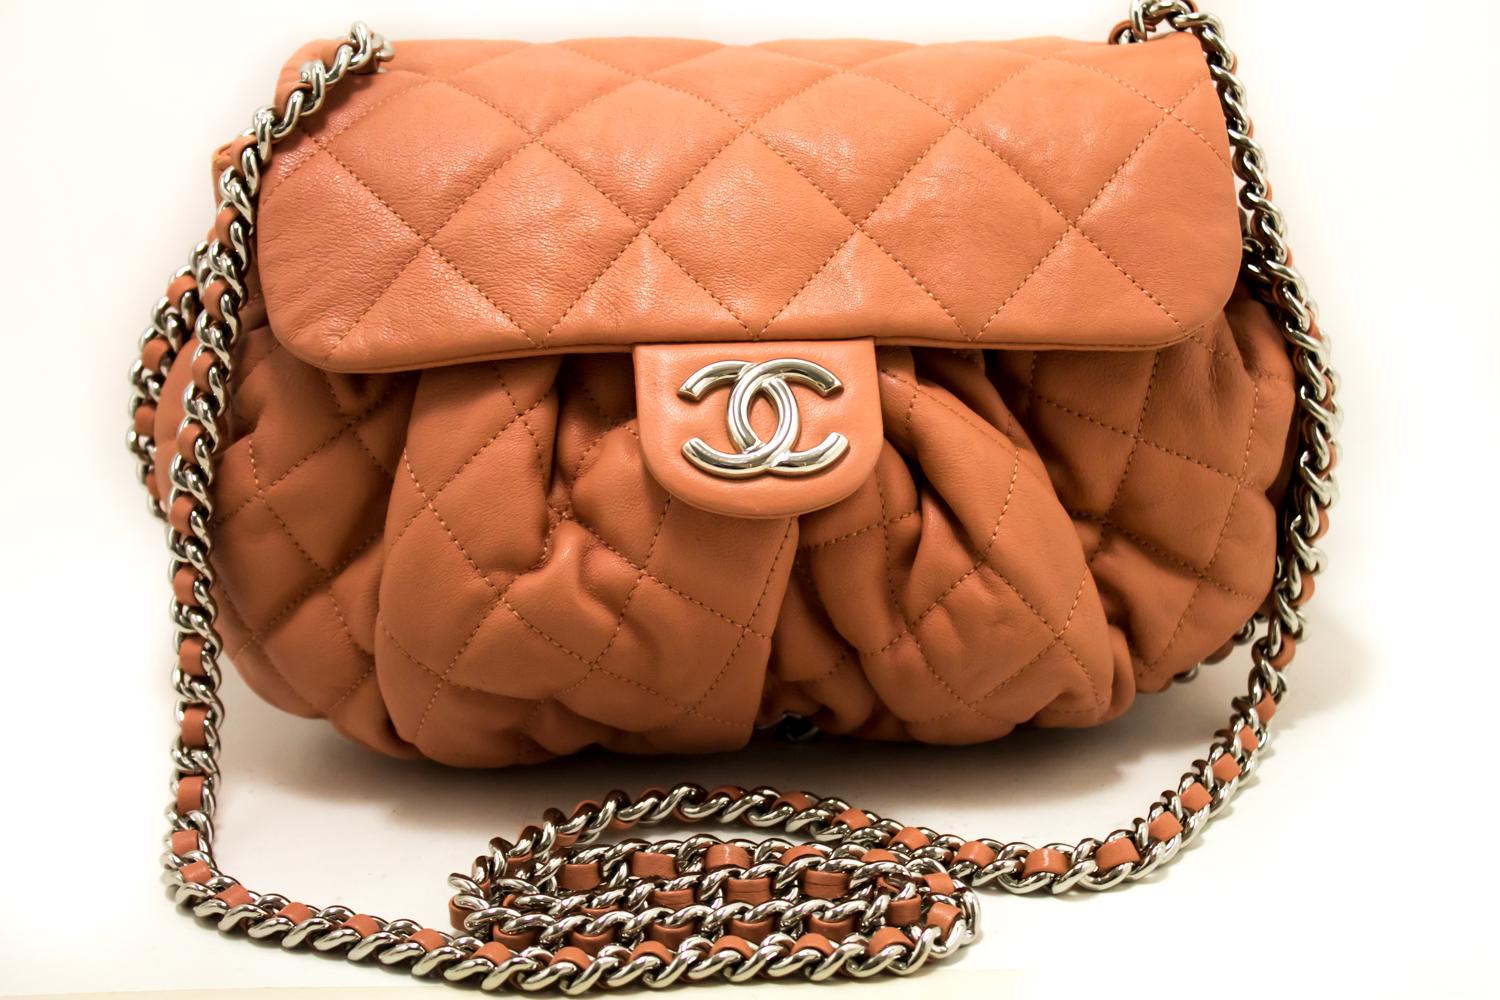 An authentic CHANEL Pink Chain Around Shoulder Bag Crossbody Quilted Flap. The color is Pink. The outside material is Leather. The pattern is Solid.
Conditions & Ratings
Outside material: Calfskin
Color: Pink
Closure: Magnetic snap
Hardware and